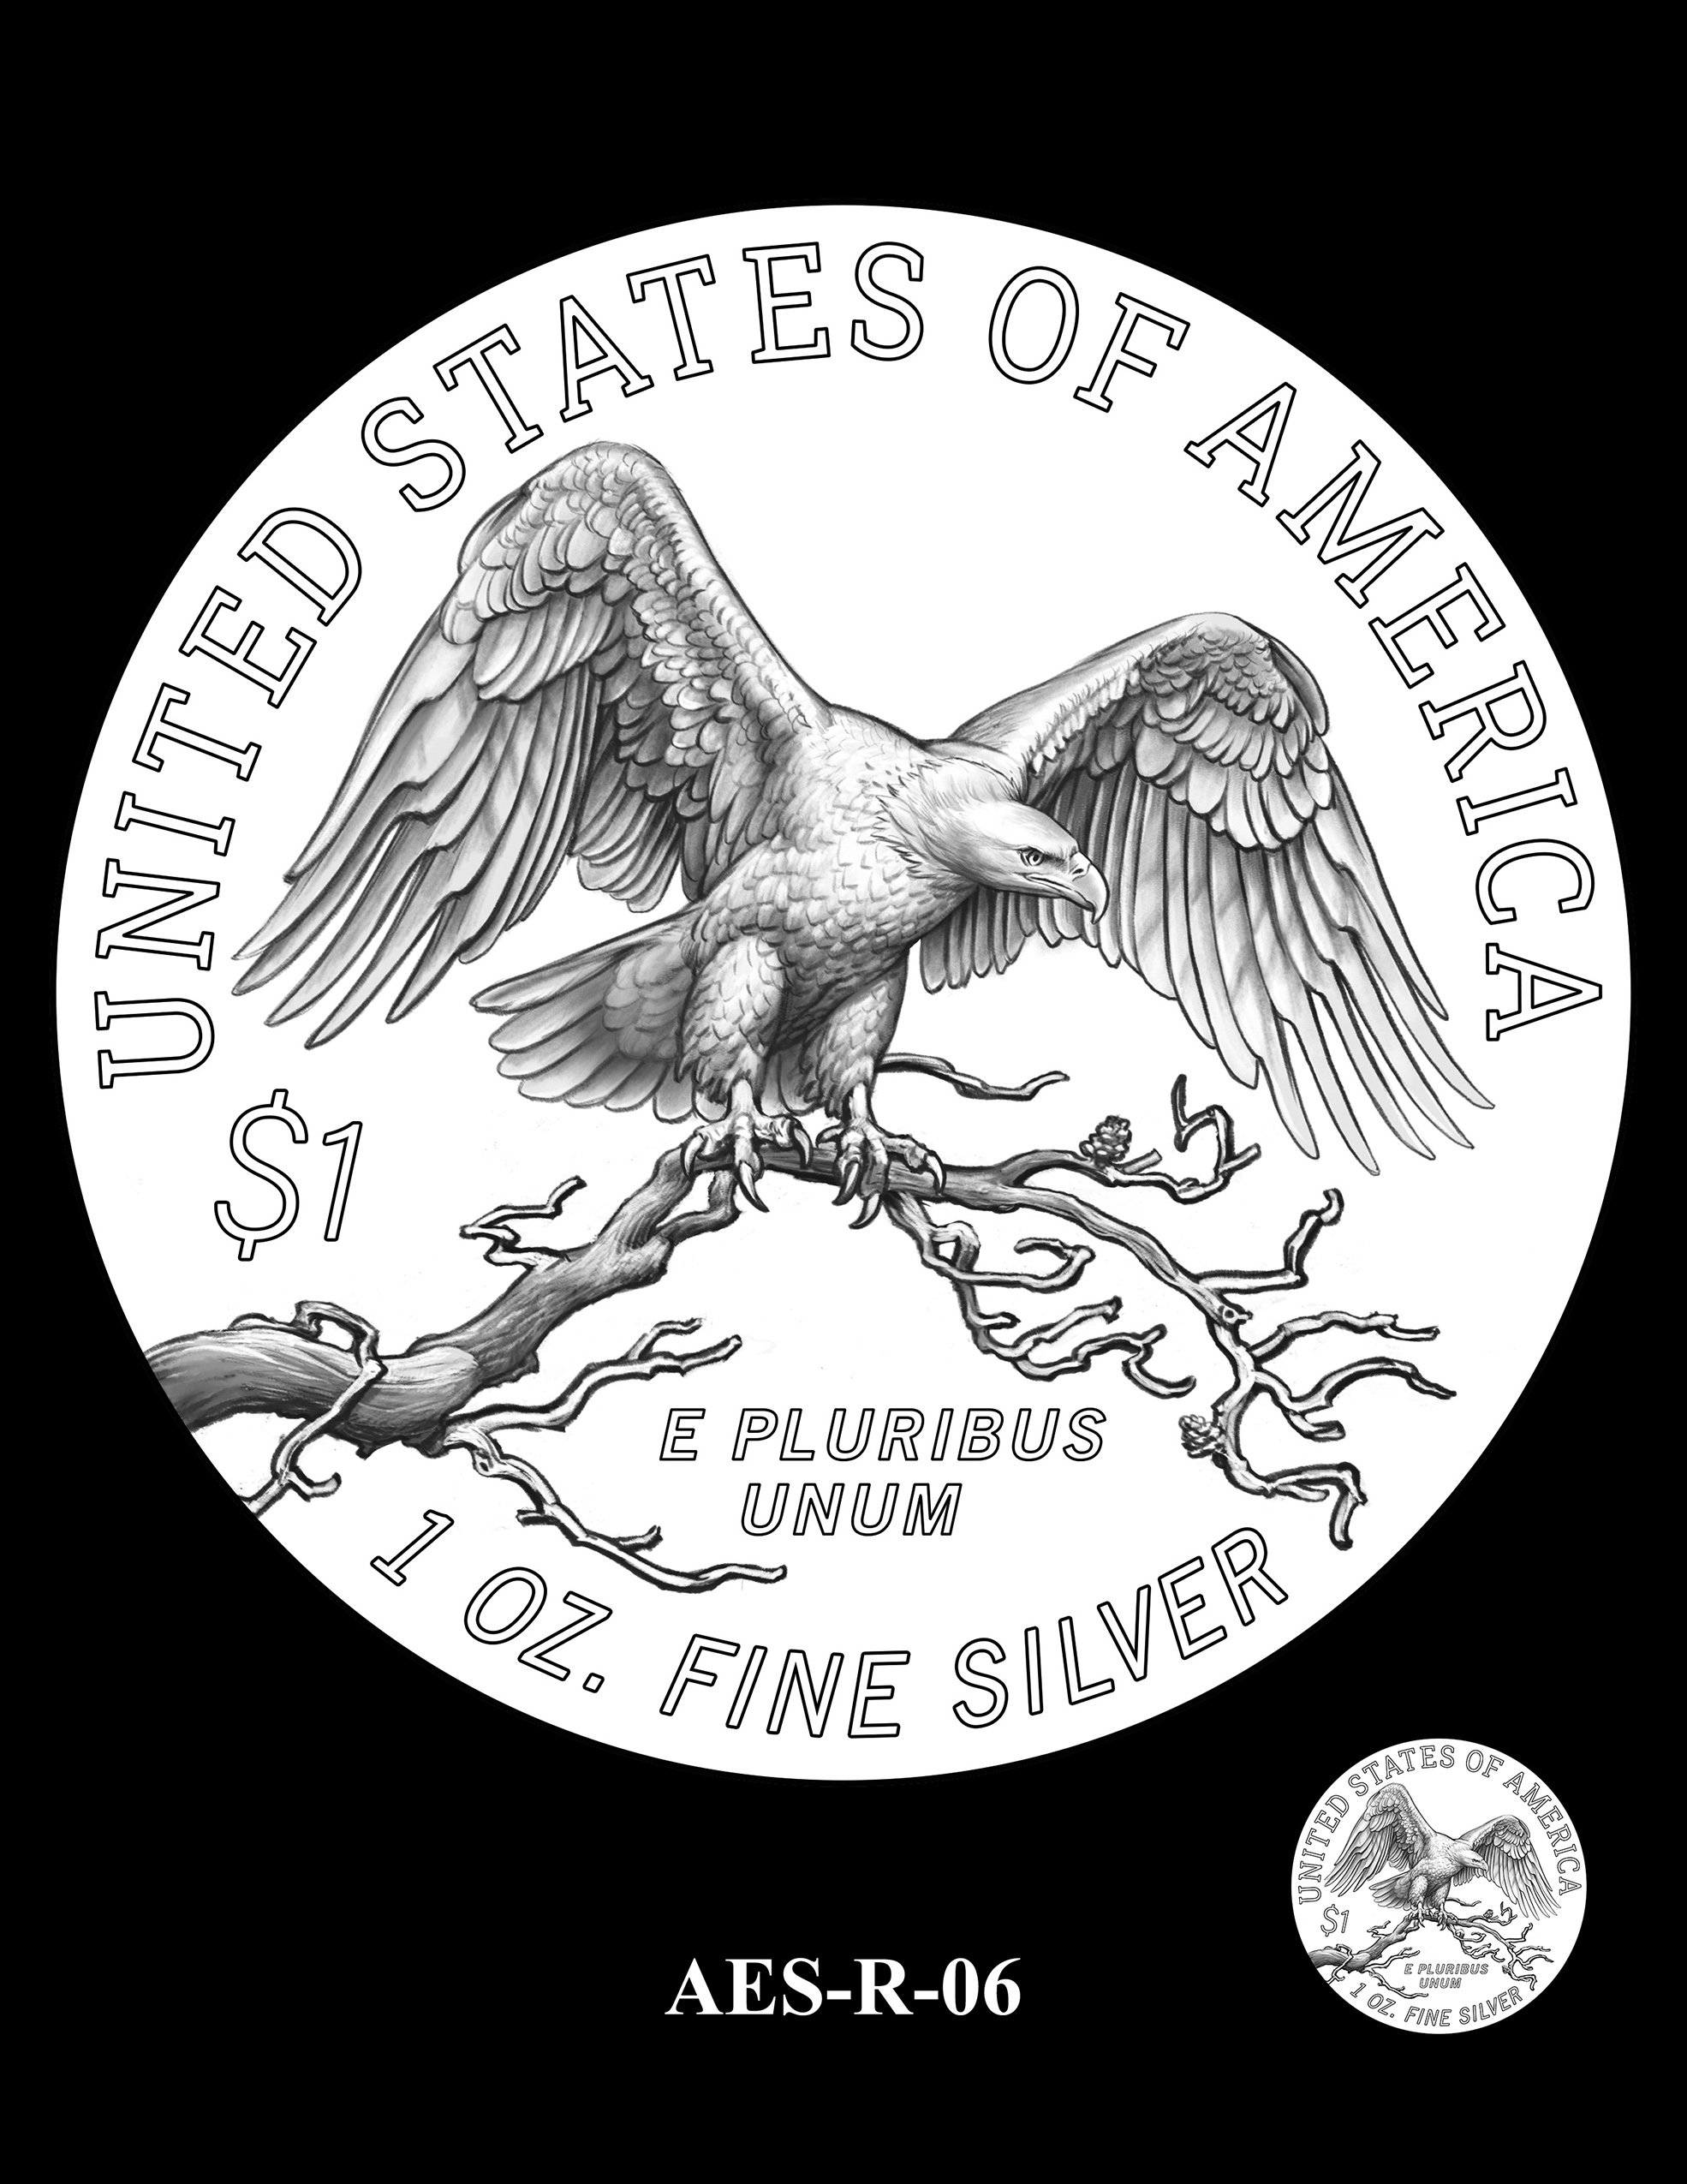 AES-R-06 -- American Eagle Proof and Bullion Silver Coin - Reverse